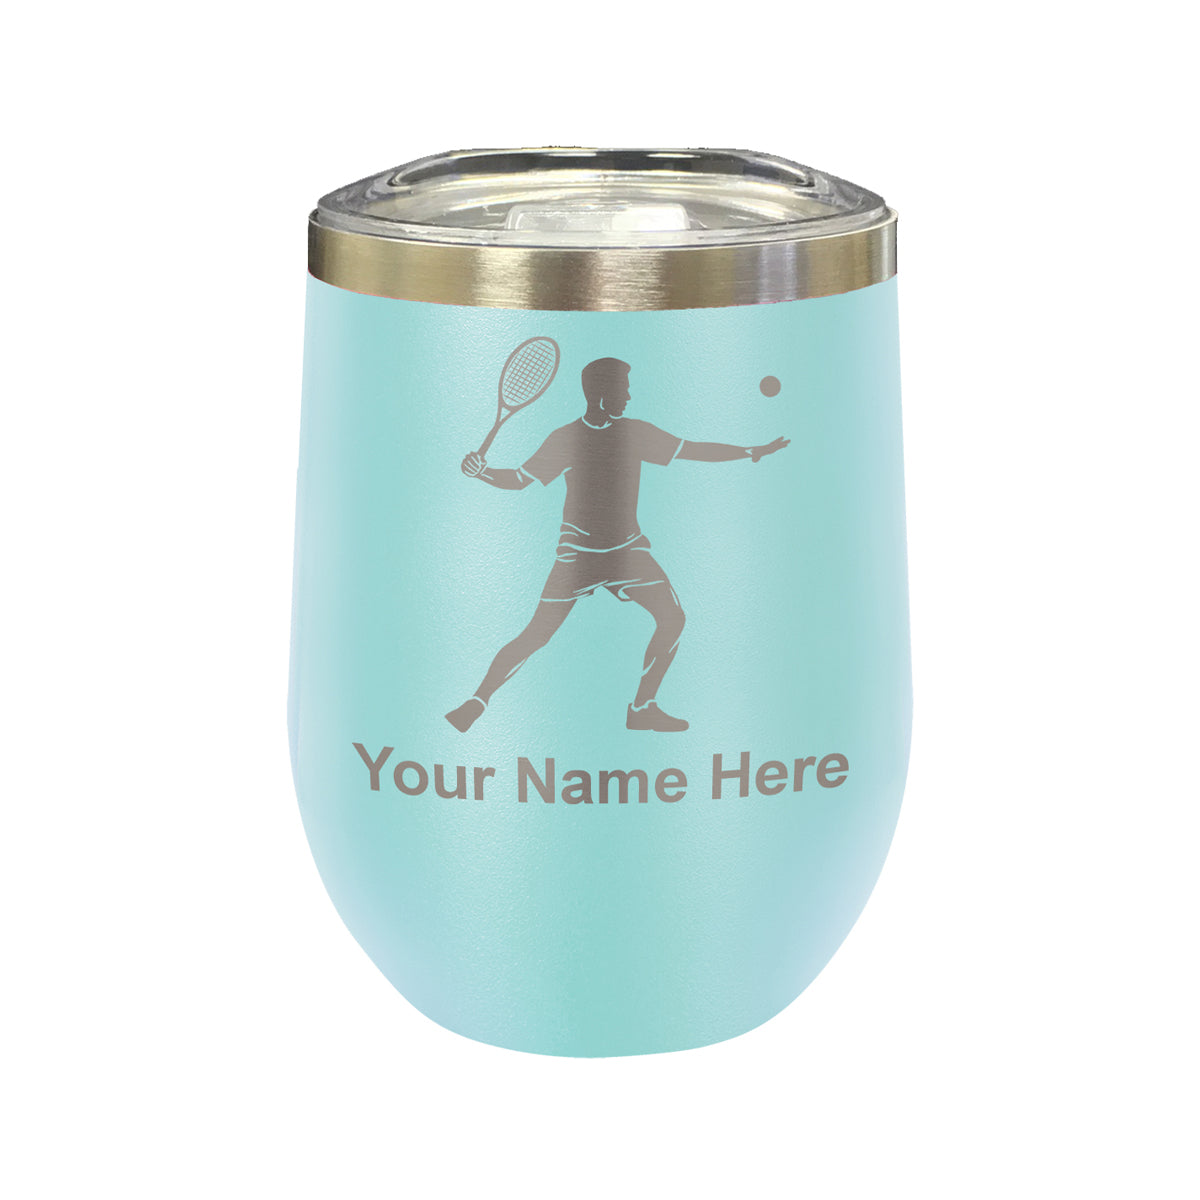 LaserGram Double Wall Stainless Steel Wine Glass, Tennis Player Man, Personalized Engraving Included